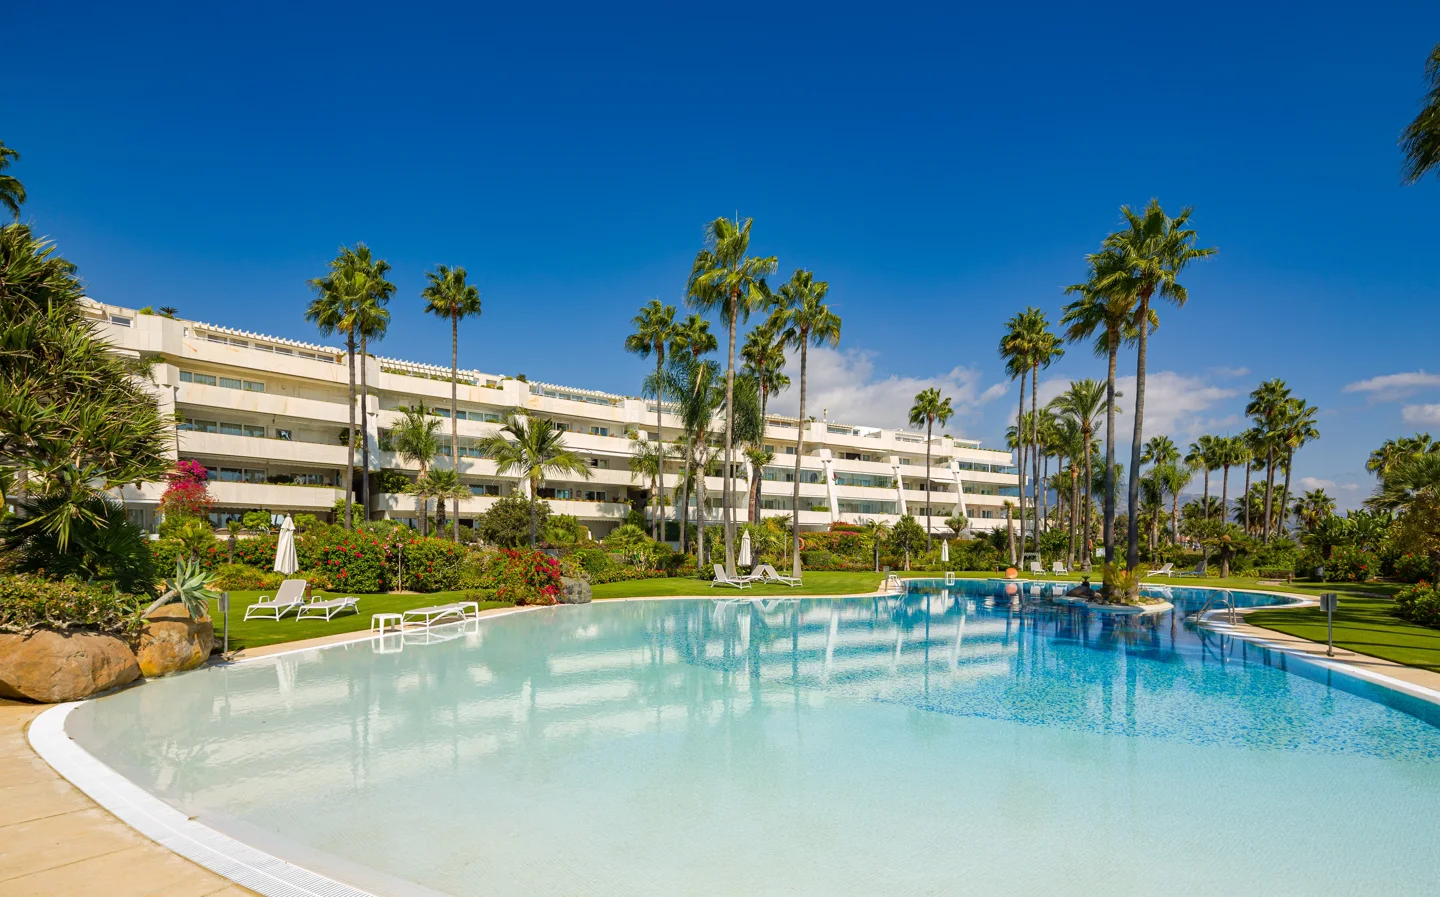 Puerto Banús: Exclusive Beachfront Apartment with Views and Luxury Amenities in prime Location